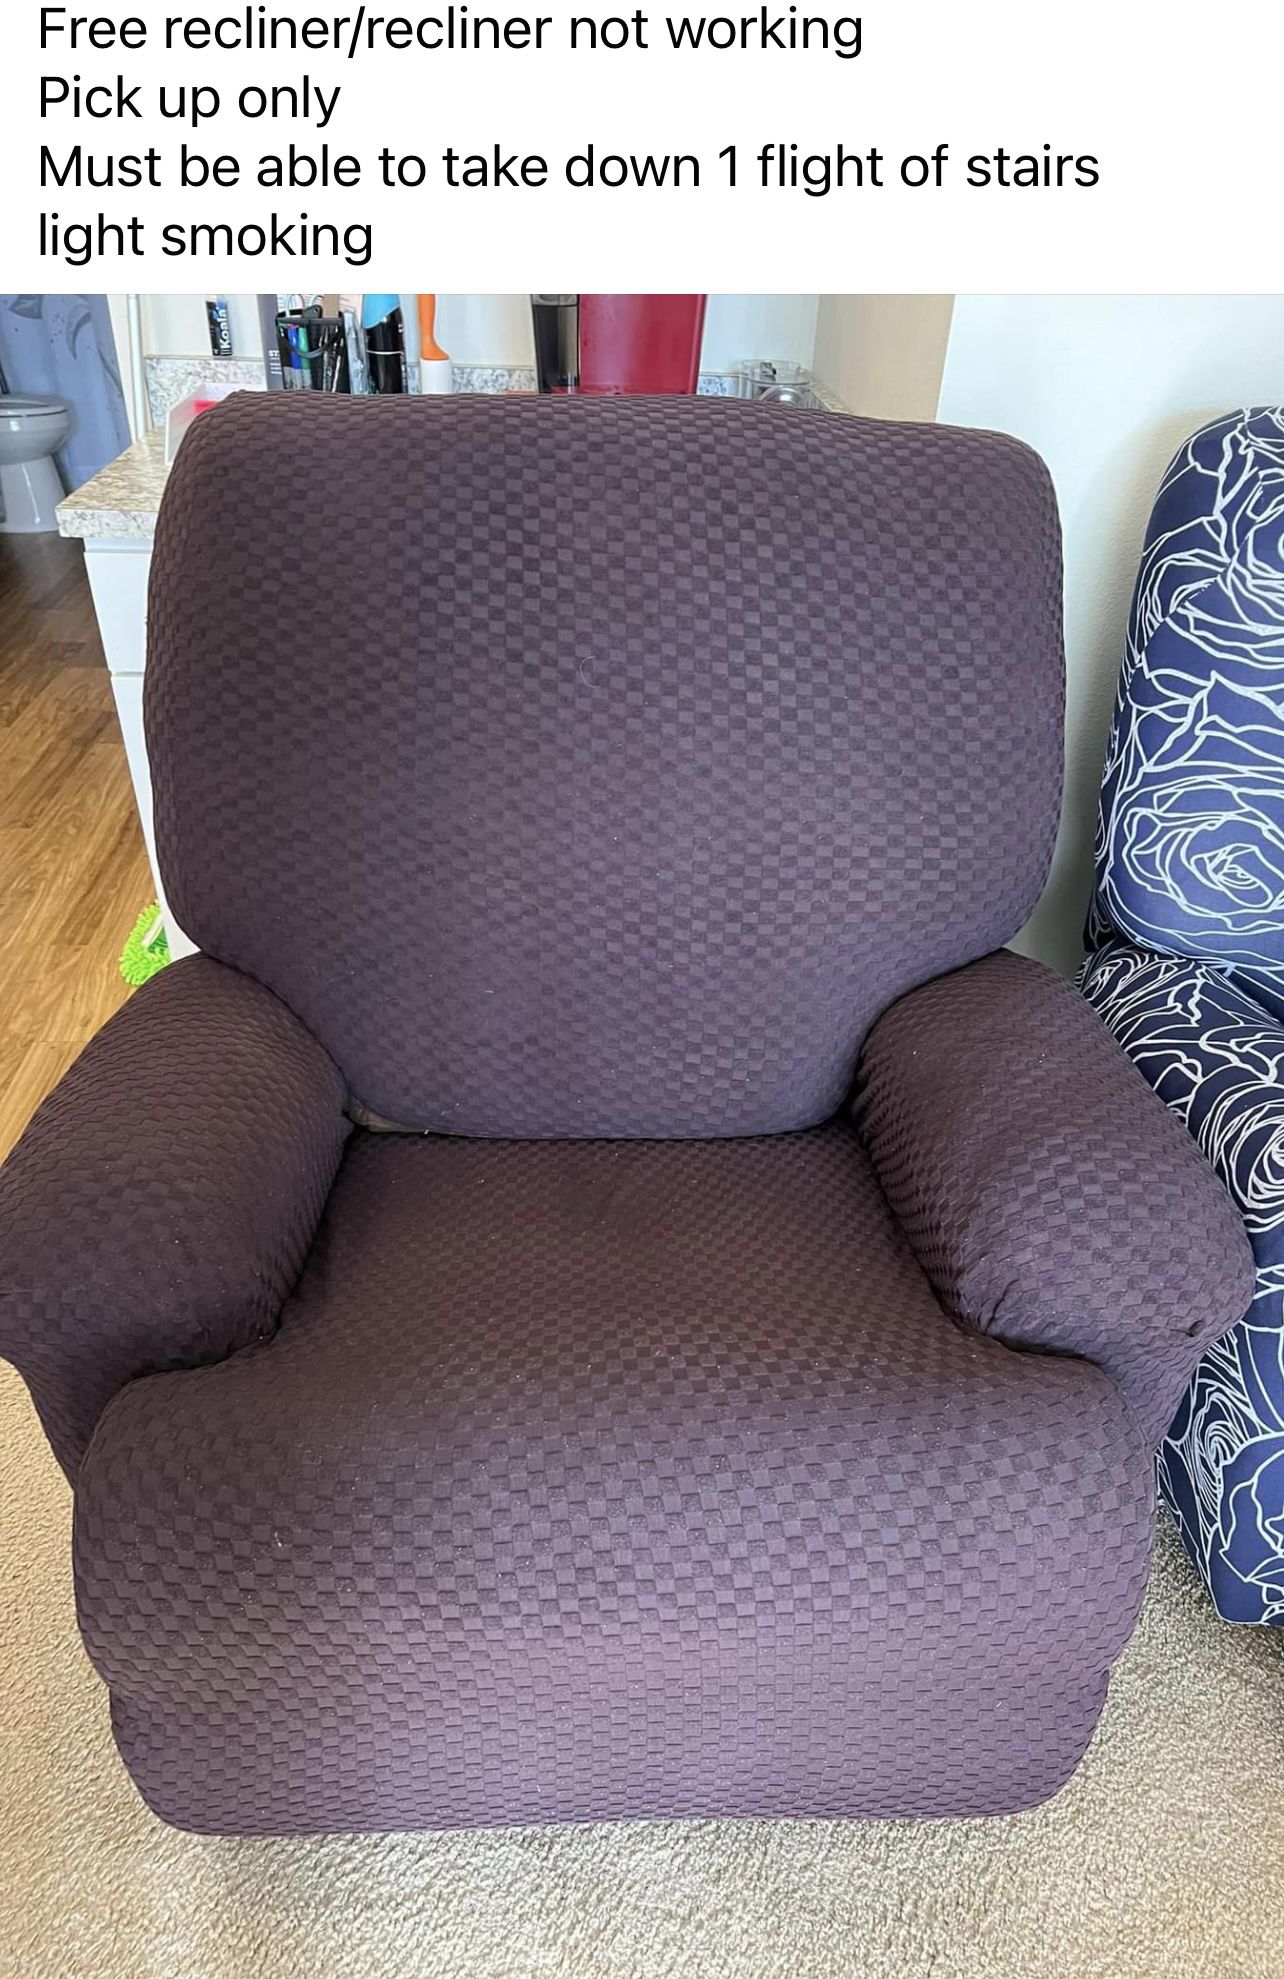 FREE Comfortable Chair